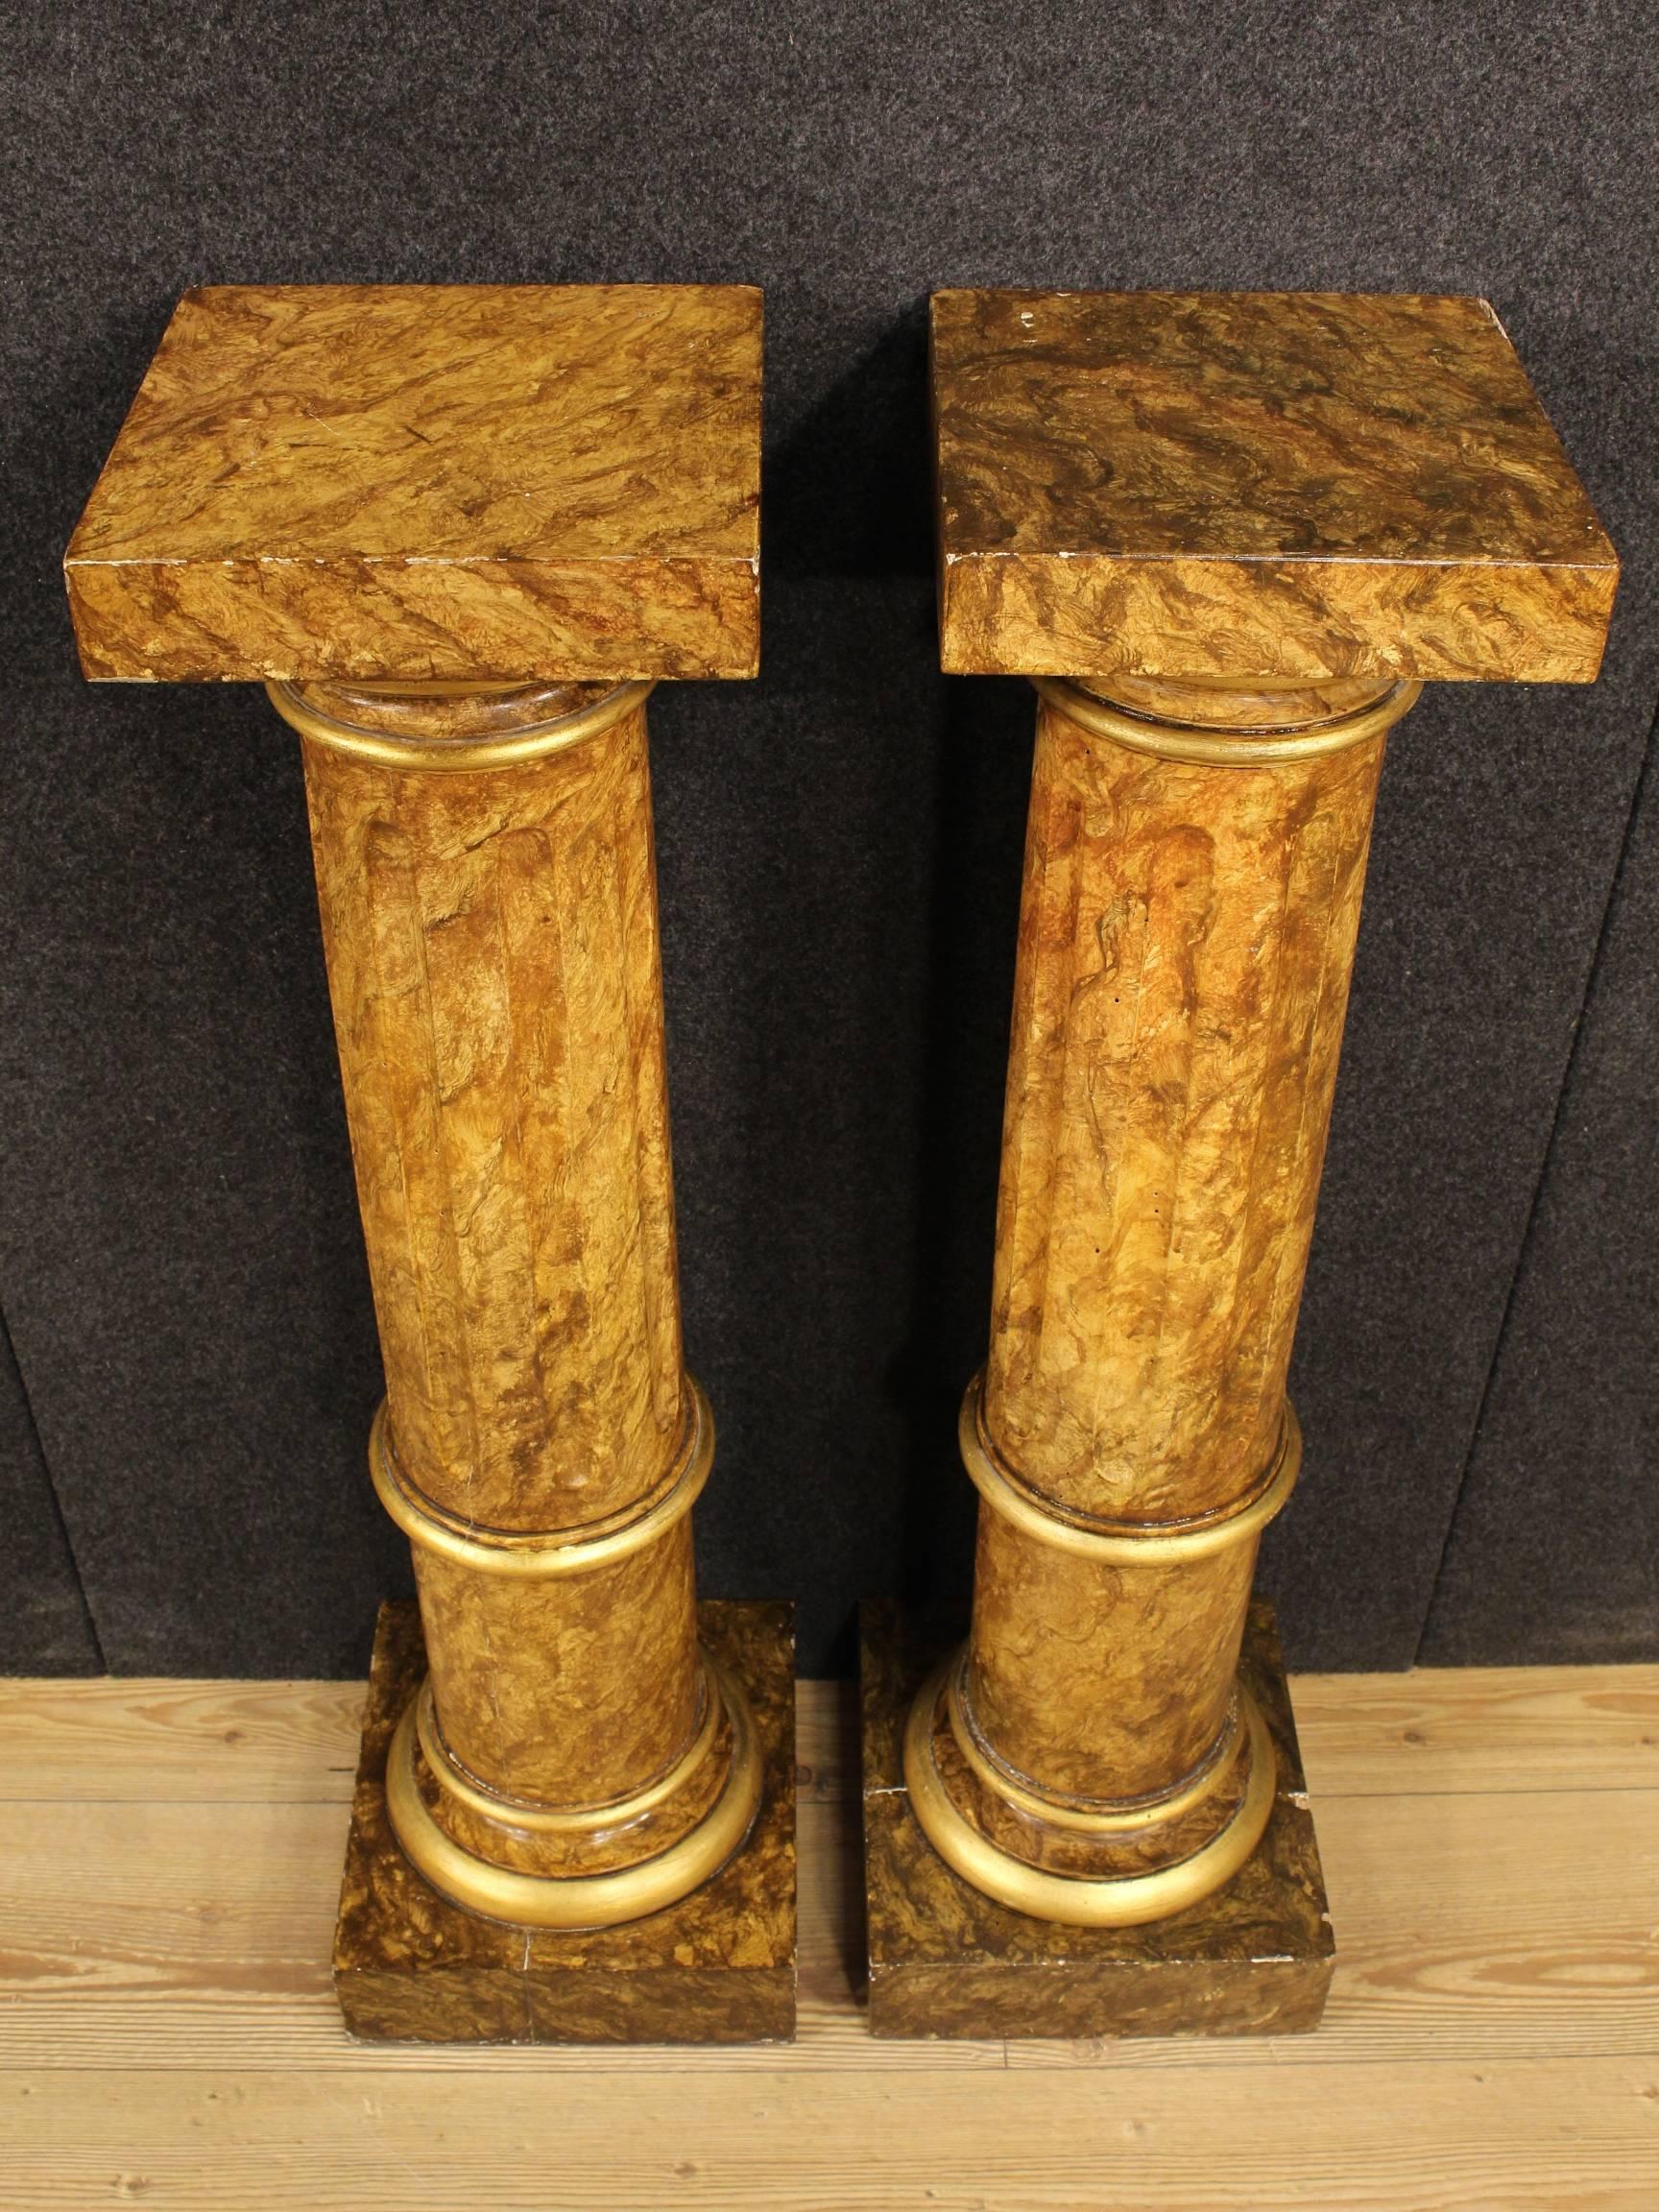 Pair of Italian columns of the early 20th century. Furniture made by ornately carved, gilded and lacquered faux marble wood of great taste and enjoyment. Columns of beautiful fit and proportion ideal to expose sculptures or objects, it can be easily